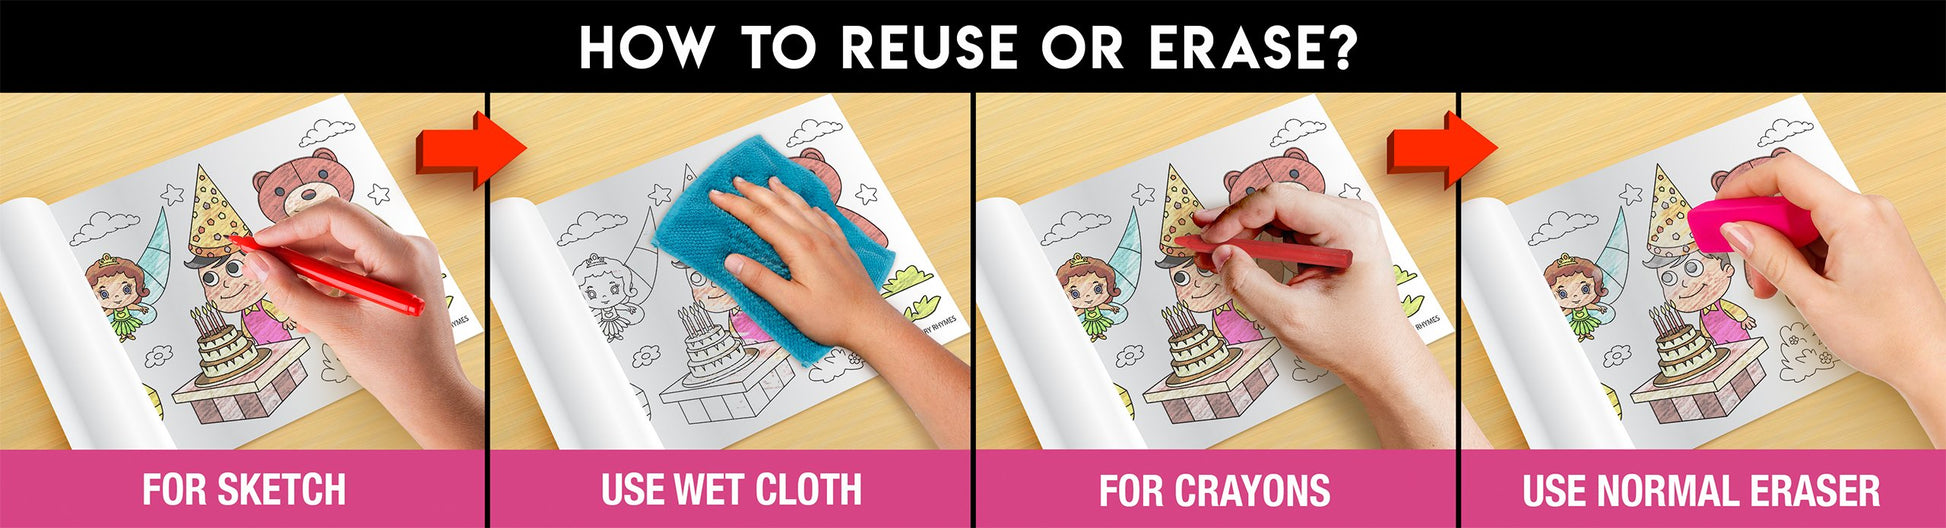 The image has a pink background with four pictures demonstrating how to reuse or erase: the first picture depicts sketching on the sheet, the second shows using a wet cloth to remove sketches, the third image displays crayons colouring on the sheet, and the fourth image illustrates erasing crayons with a regular eraser.